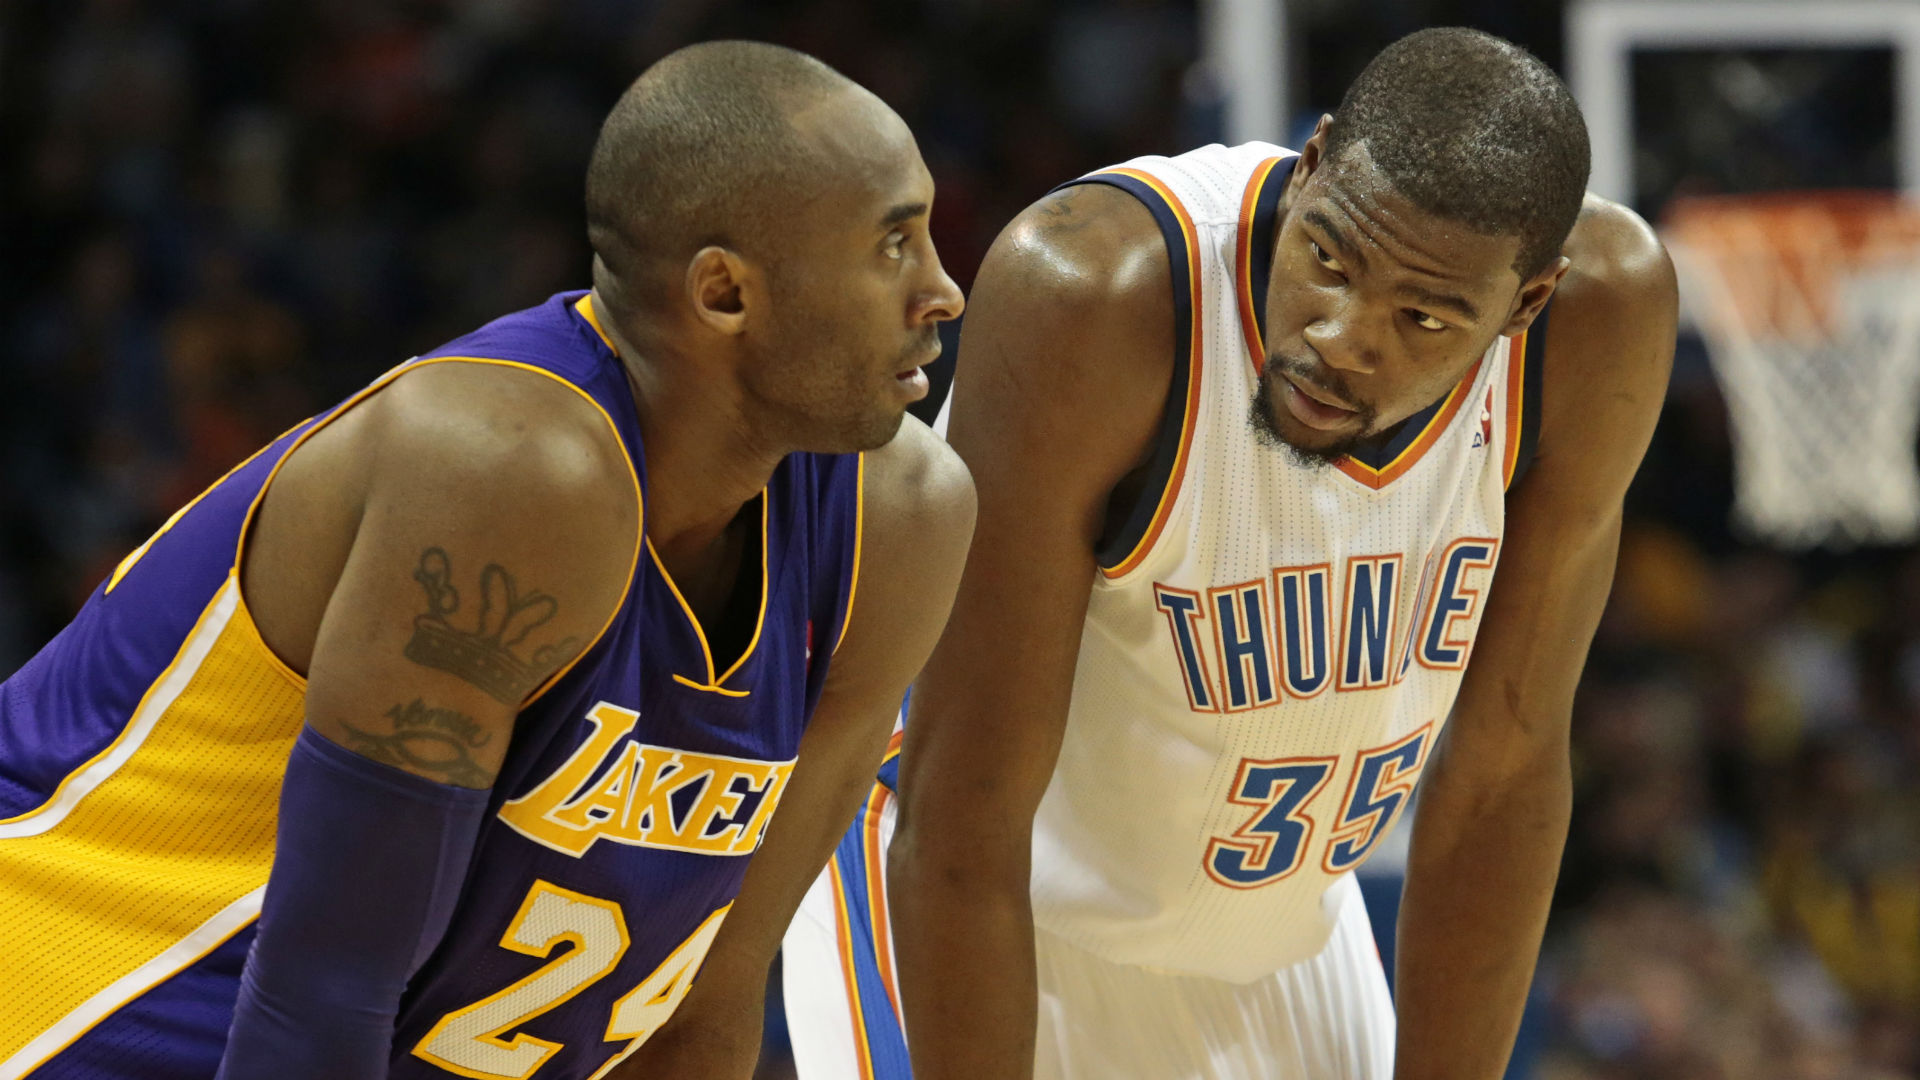 Teams have paid tribute to Kobe Bryant in a variety of ways, but Kevin Durant believes no gesture will do him justice.